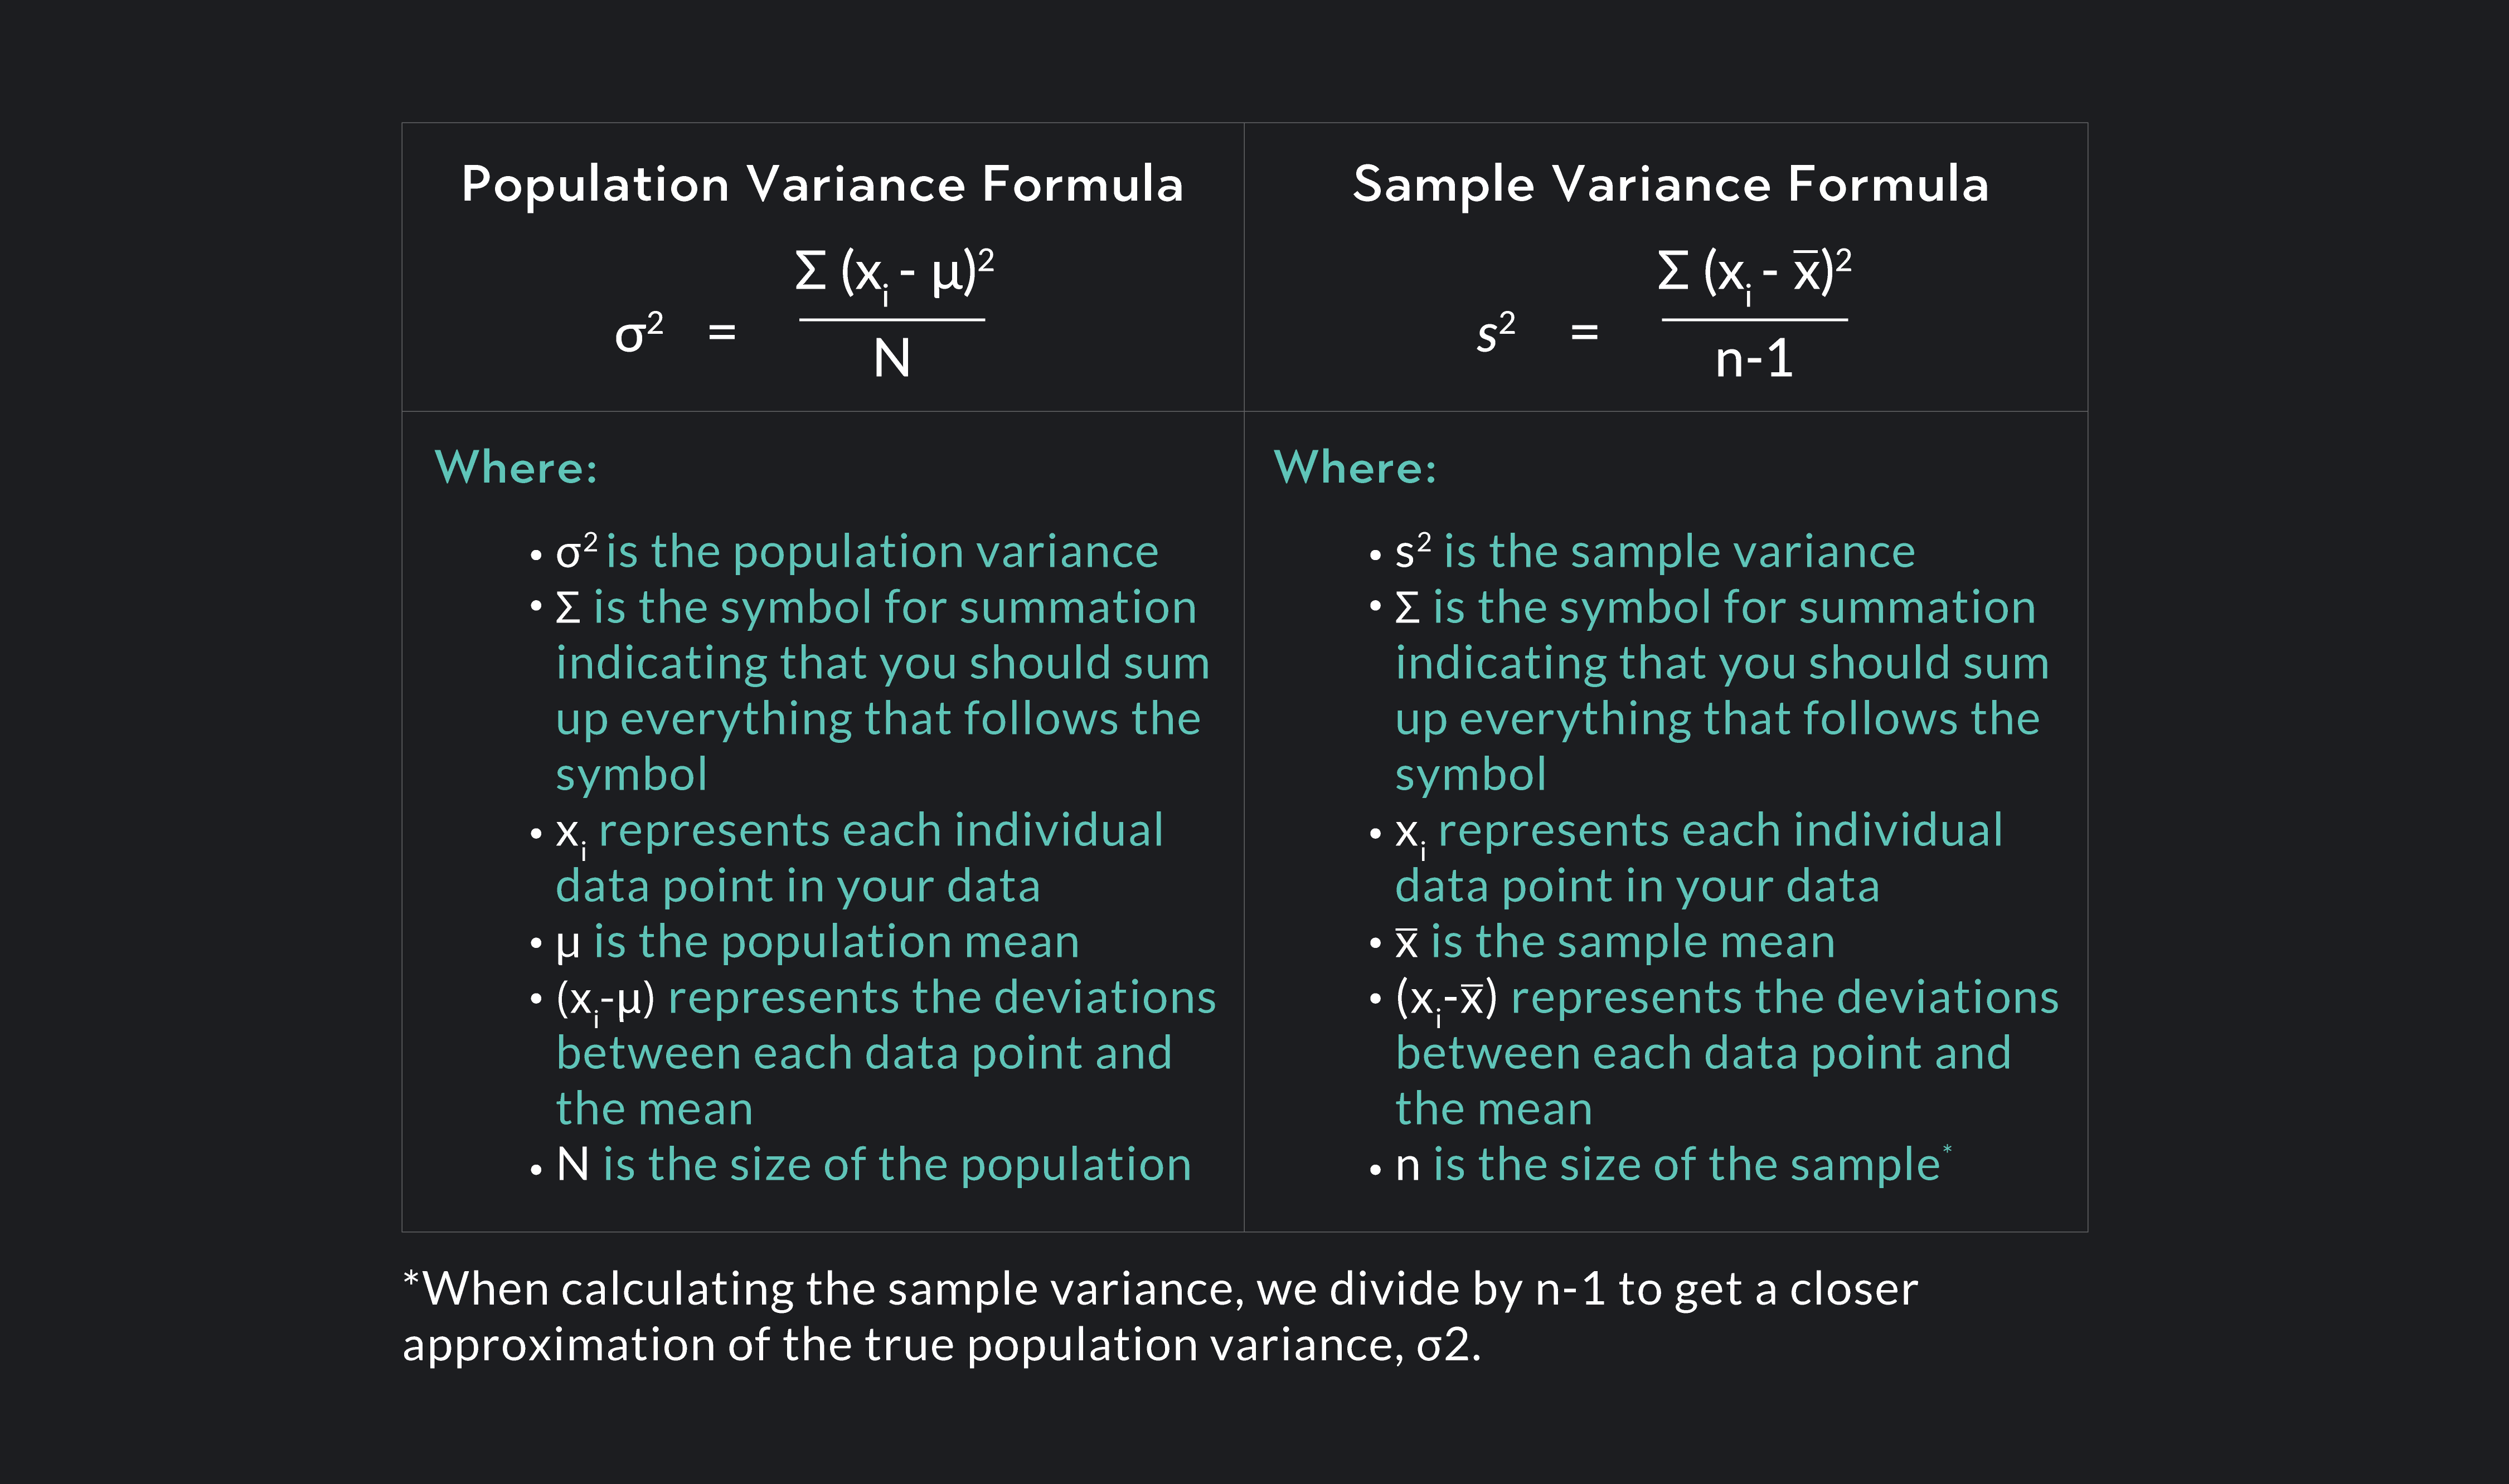 hypothesis testing on variance